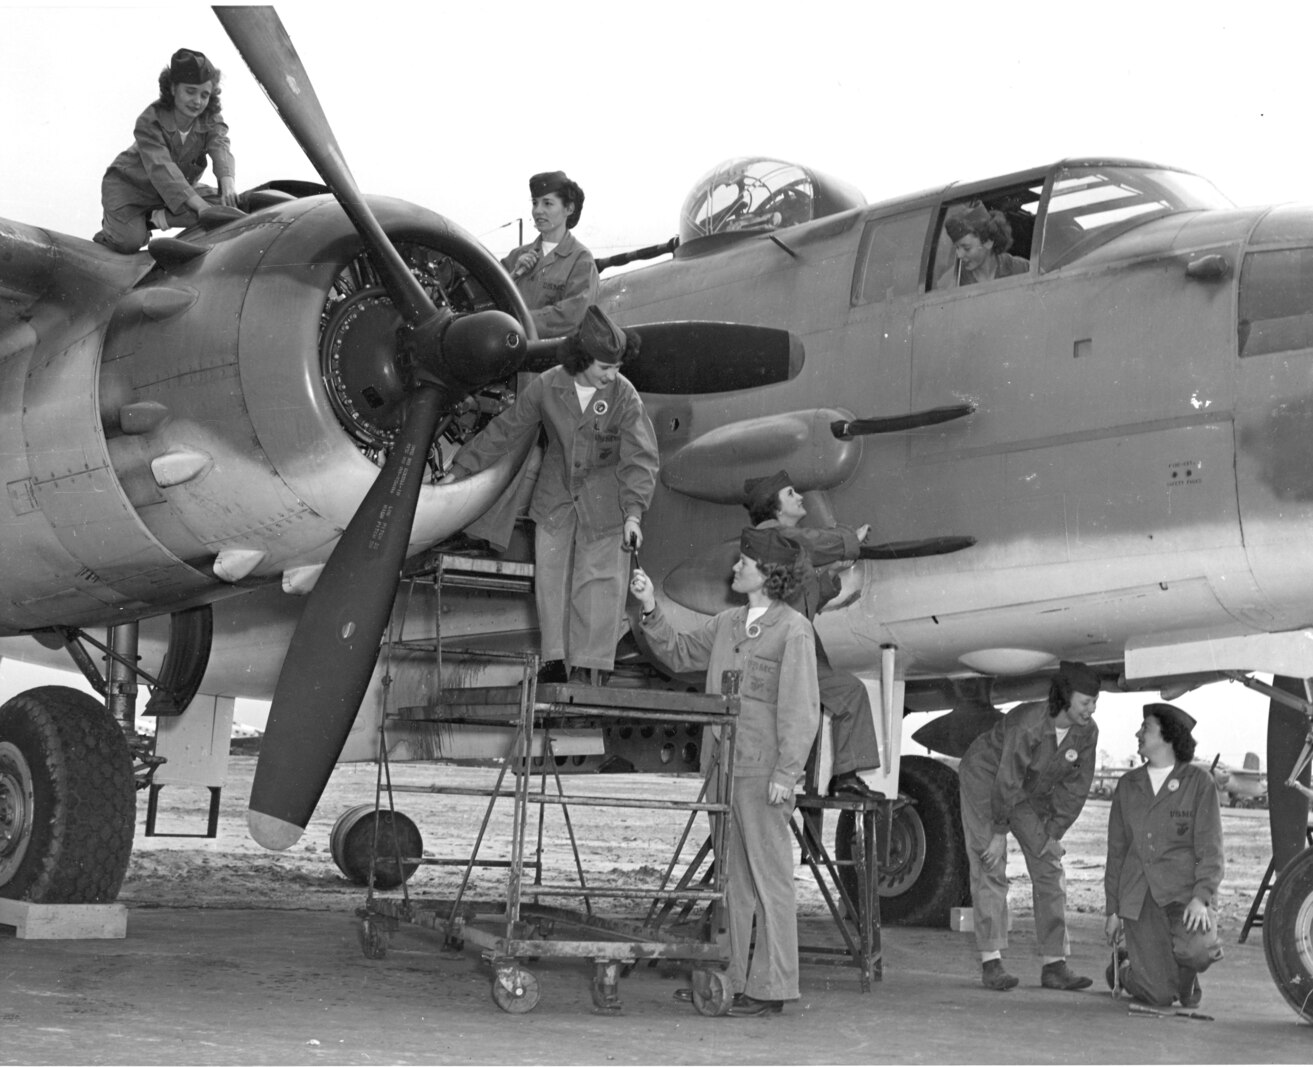 Women were once again needed in the Second World War.  Pictured here are women in just one of the many jobs they performed, they are putting the finishing touches on a PBJ medium bomber.  Atop the engine nacelles at left is Pfc Thelma O. Martin.  Working on the cowling below her is PFC Ruth T. Dincau, while Pfc Eunice L. Anderson works on the propeller.  Directing them from the ground is crew chief T/Sgt Selma “Rusty” Olson.  Adjusting machine gun covers is PFC Bettie L. Smith.  Sgt Margaret A. Engwald is in the cockpit and Pvt Carol C. Peters is crossing under the plane to the other side.  Working on the landing gear are PFC Eleanor D. Moore and Pvt Frances V. Gulbransen. 
DEFENSE DEPT PHOTO (MARINE CORPS) 8927